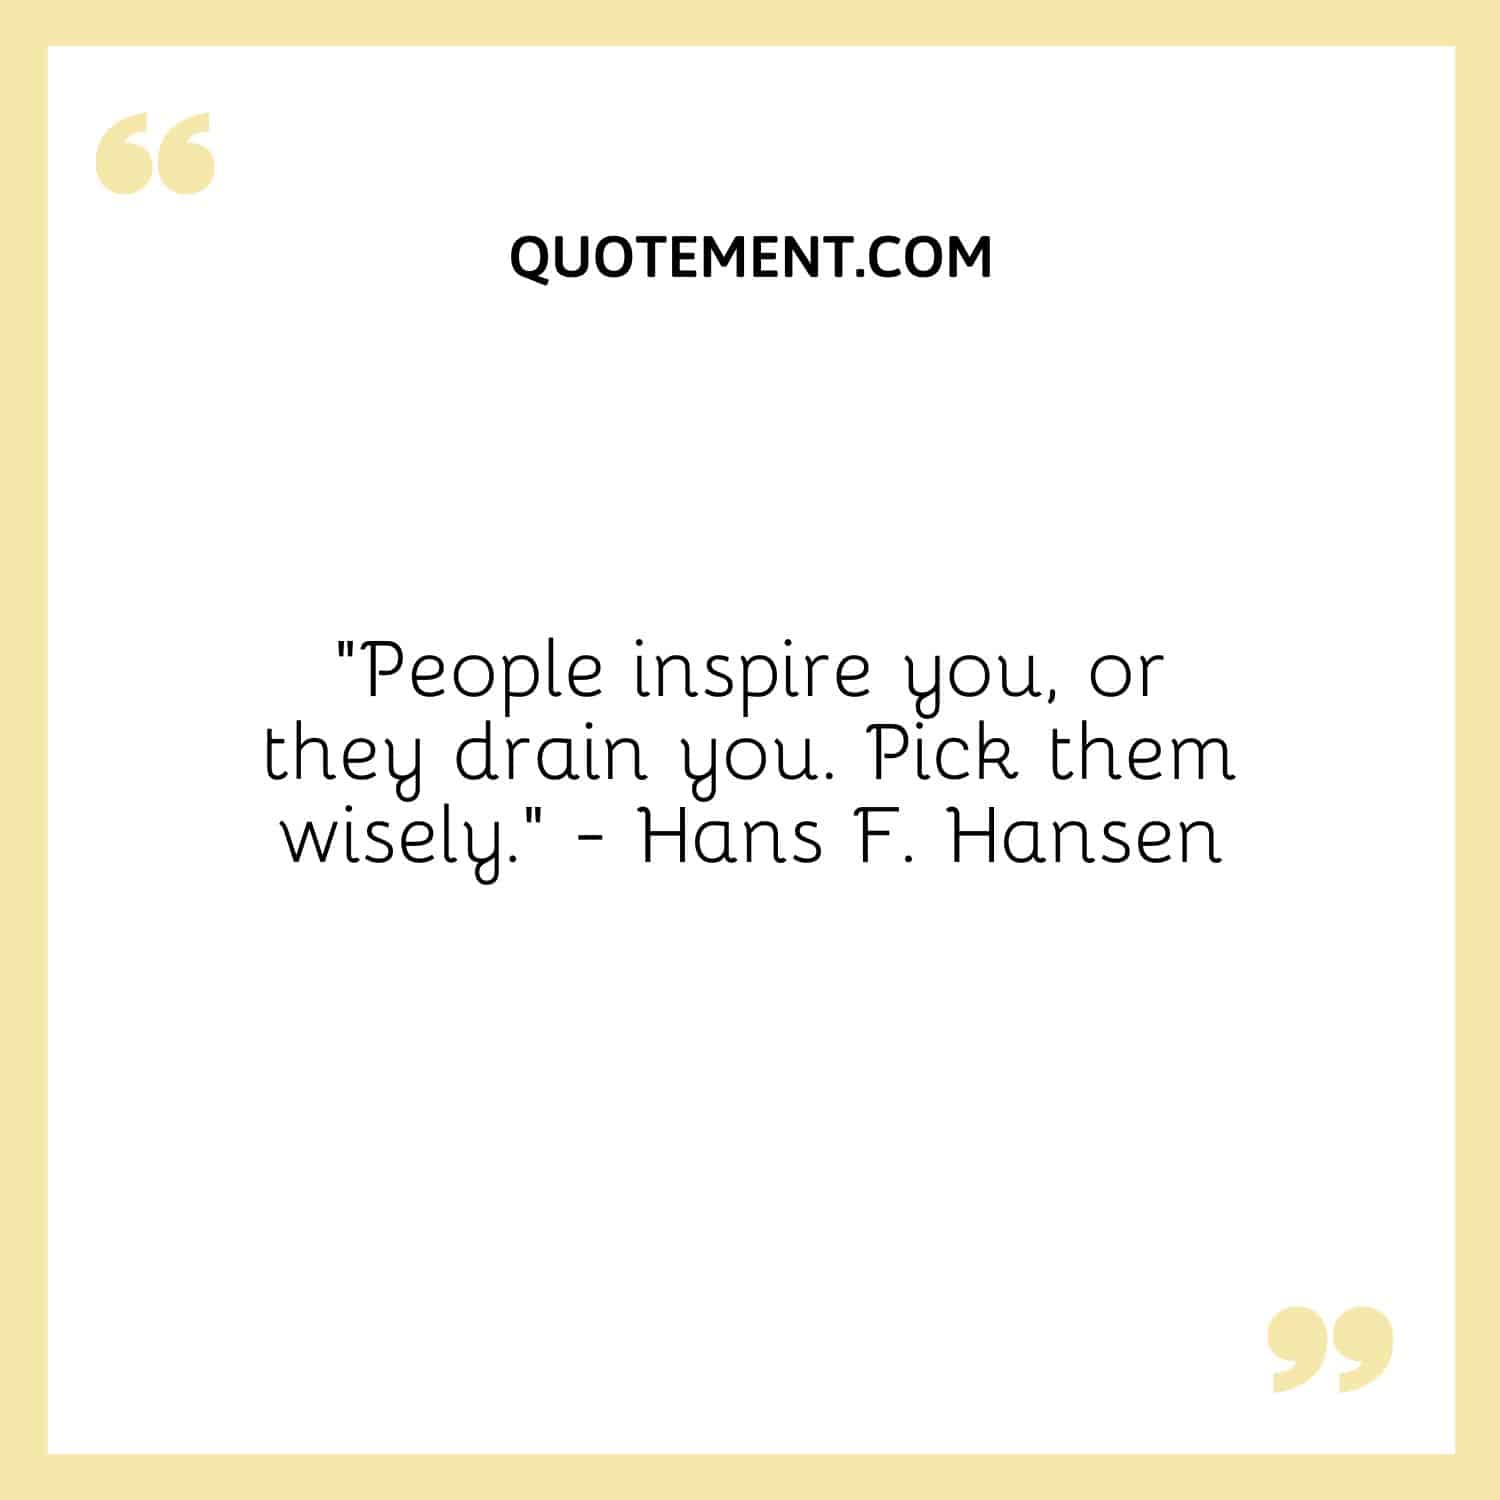 “People inspire you, or they drain you. Pick them wisely.” - Hans F. Hansen